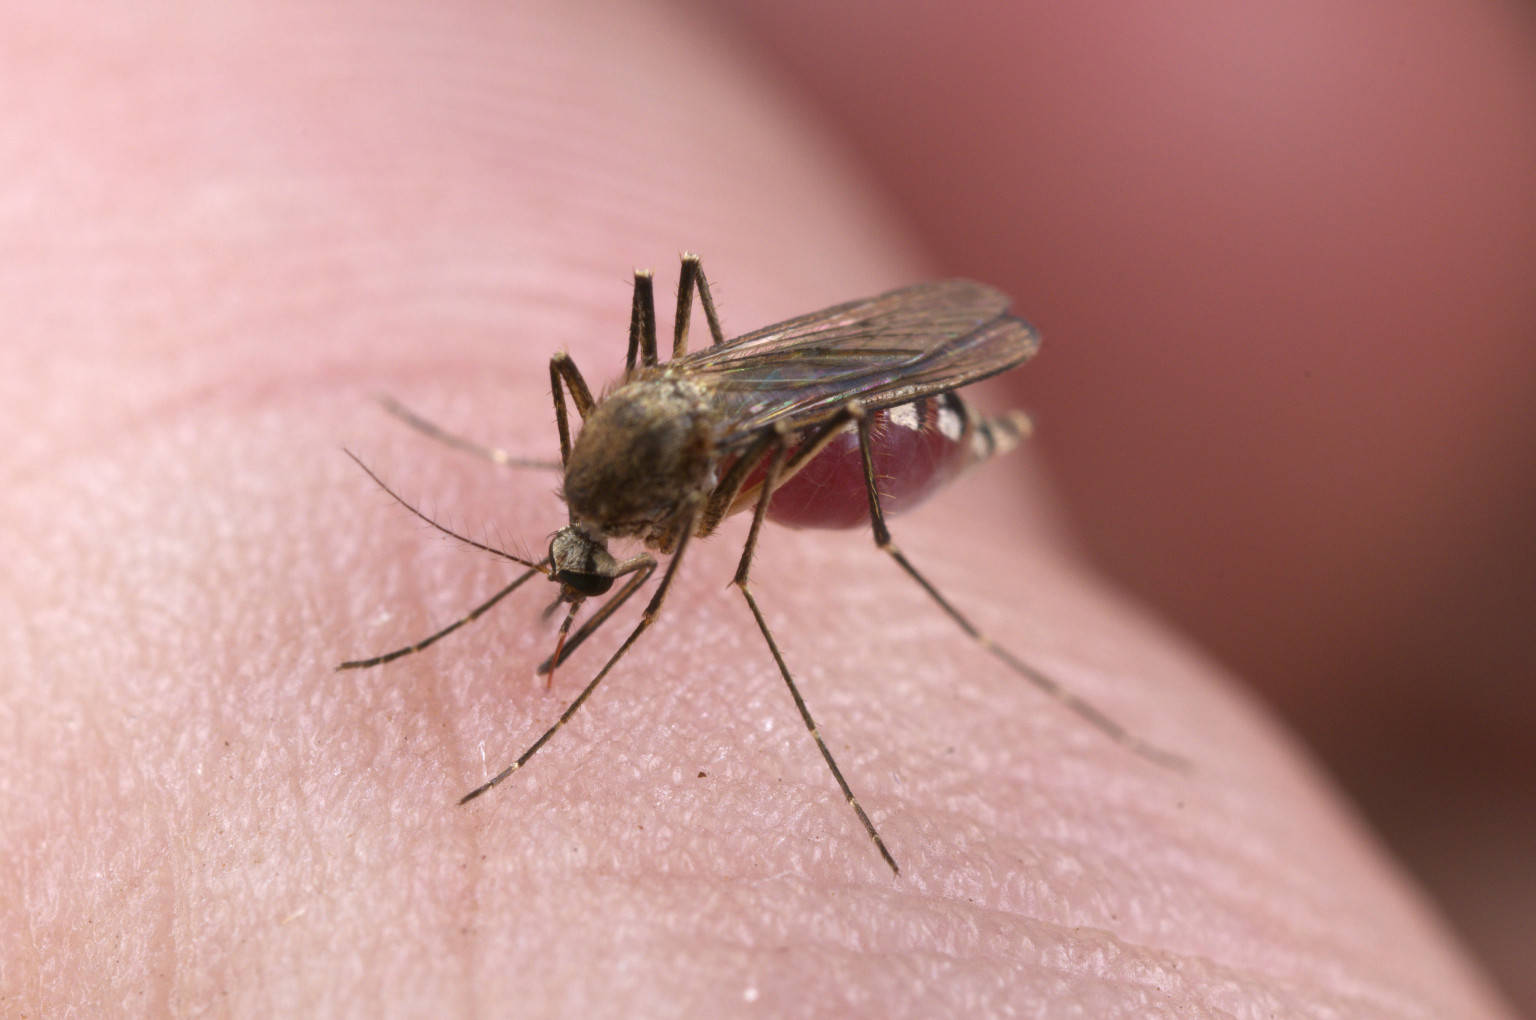 Mosquito With Proboscis Plunged Into Human Flesh Wallpaper